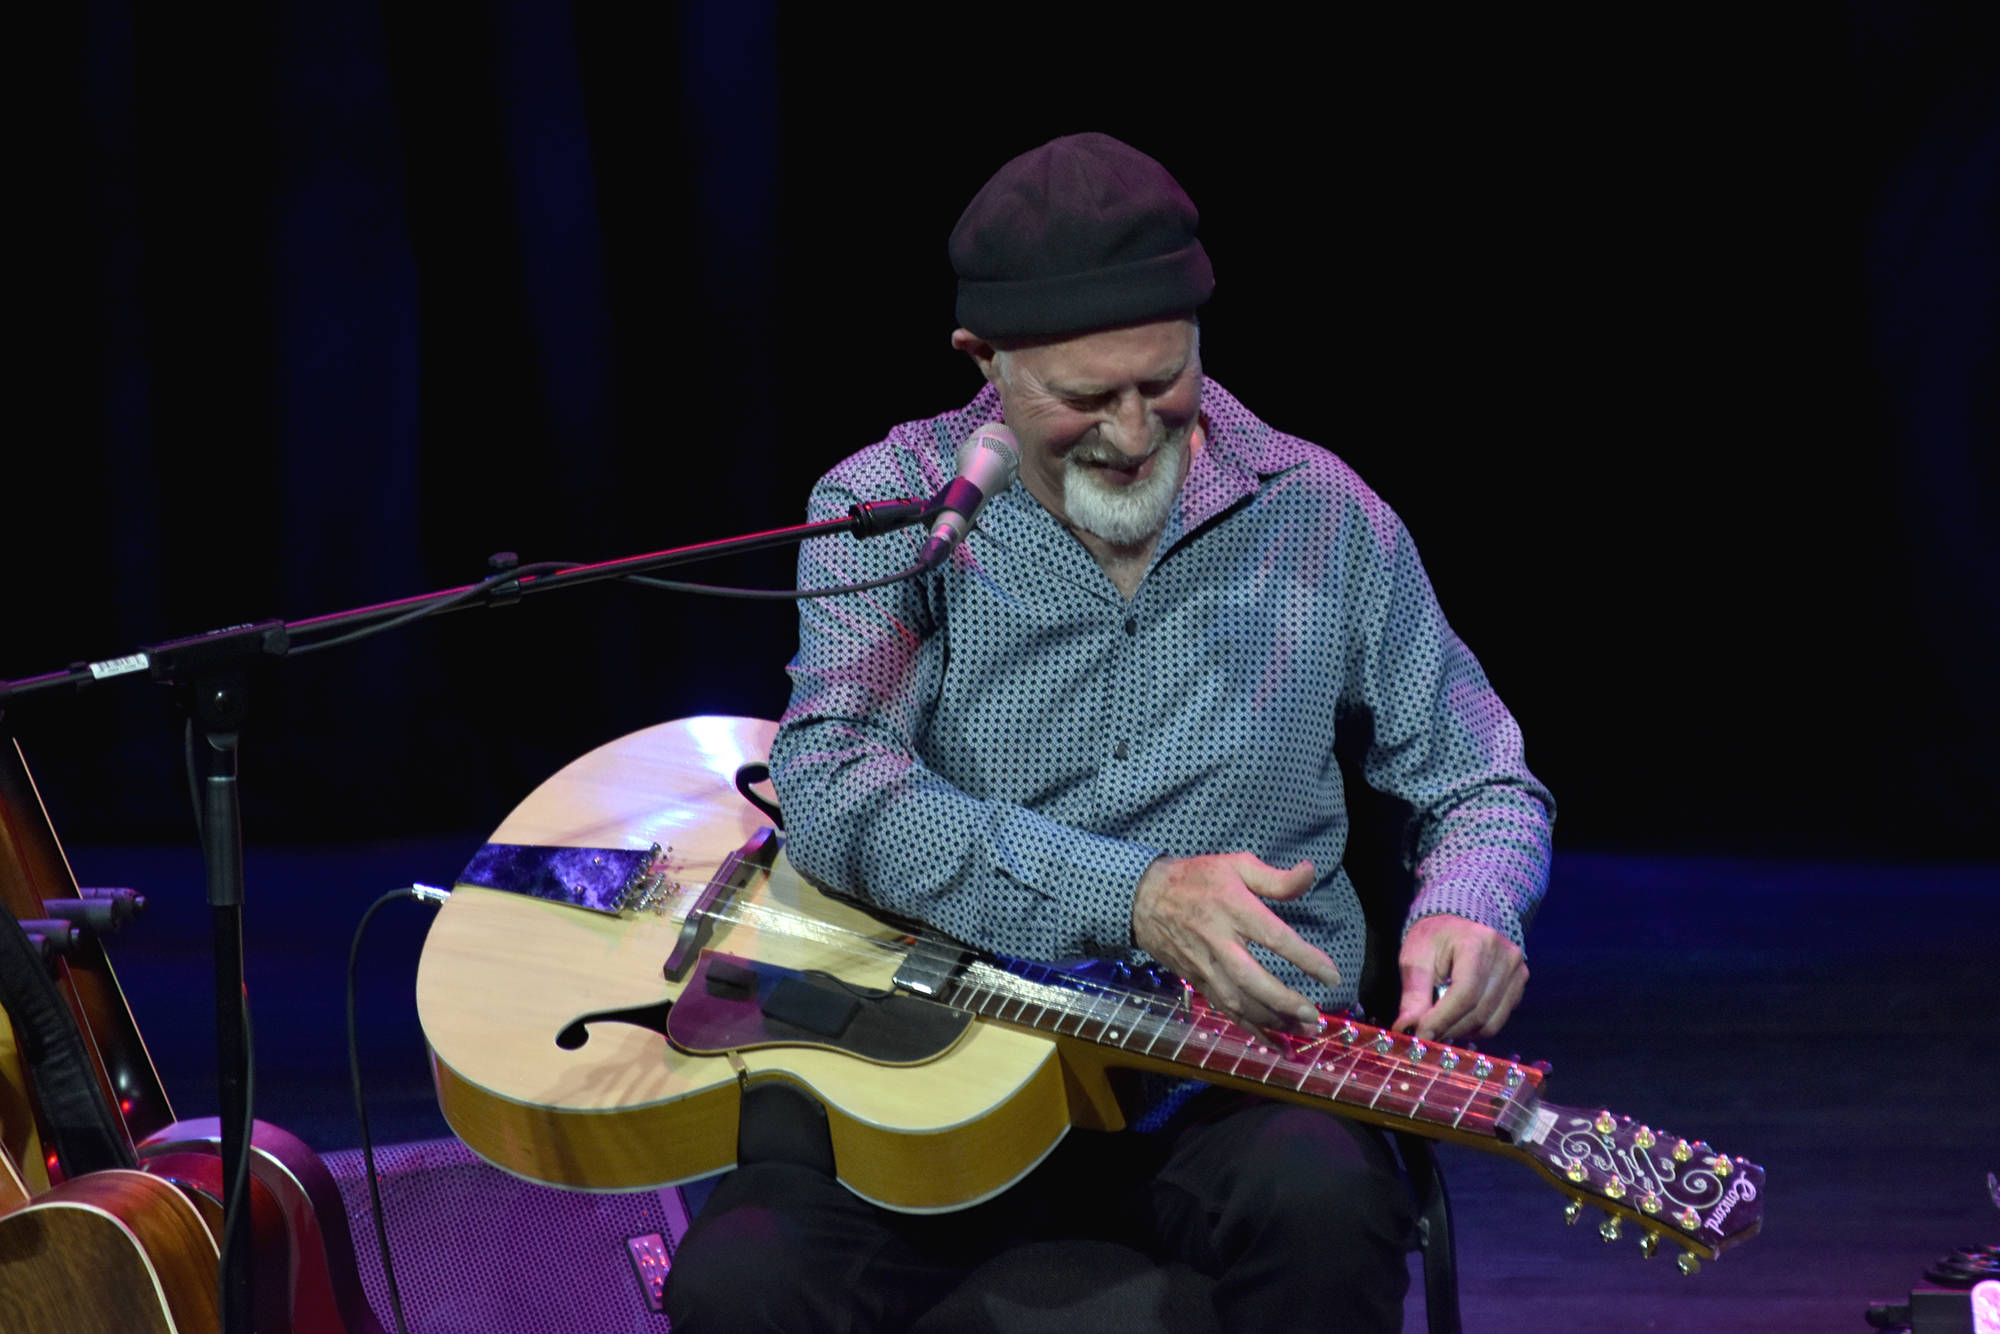 Harry Manx live at Venables Theatre on July 28. (Brennan Phillips - Western News)